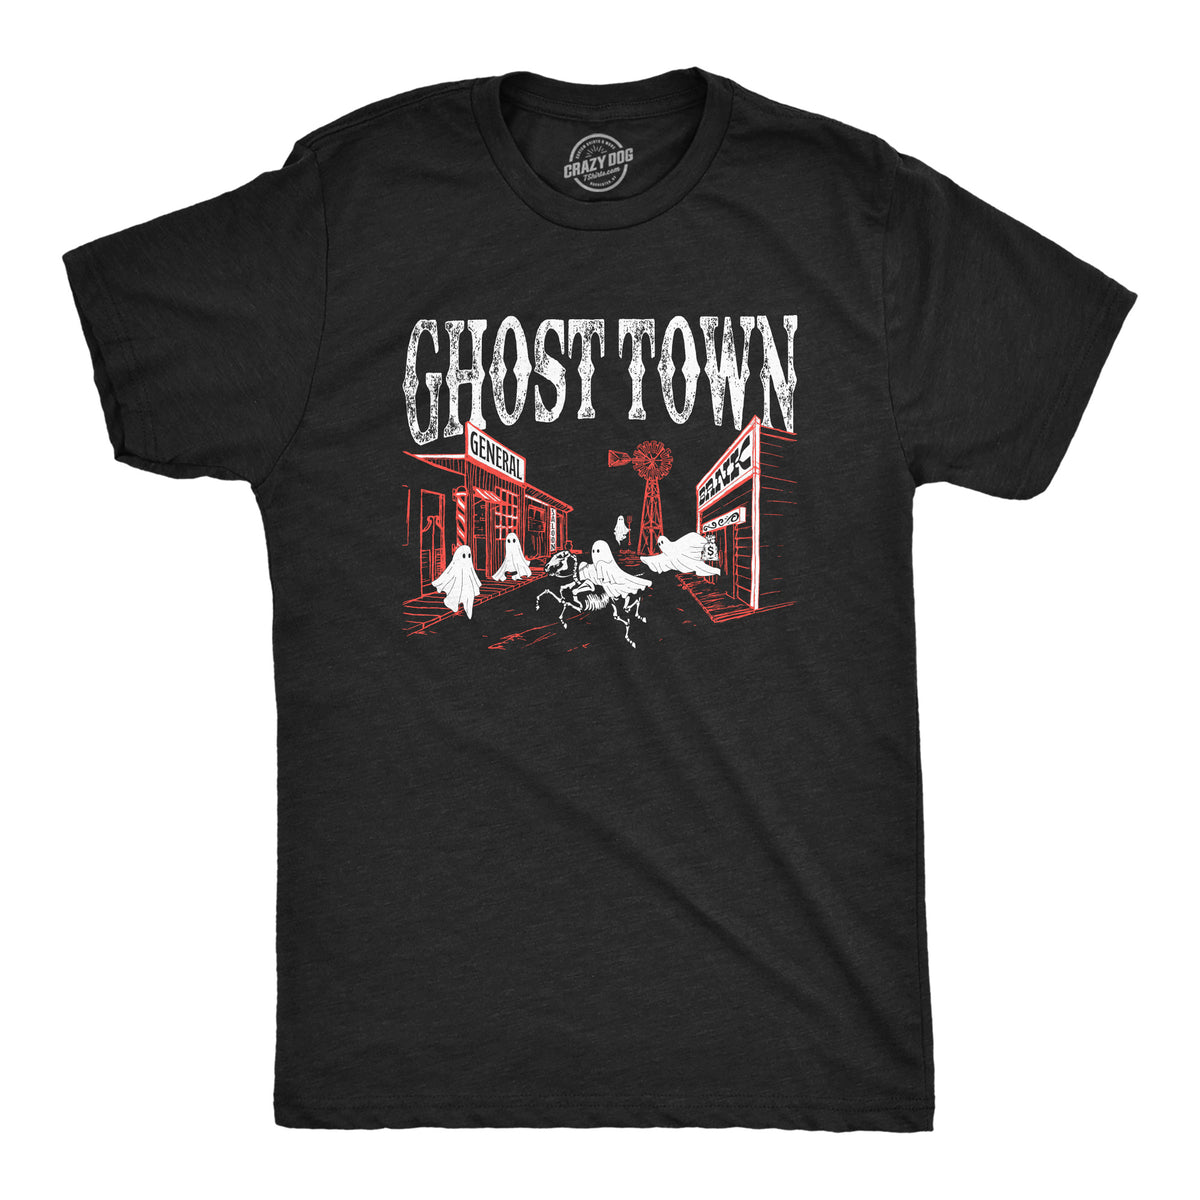 Funny Heather Black - GHOST Ghost Town Mens T Shirt Nerdy Halloween sarcastic Tee